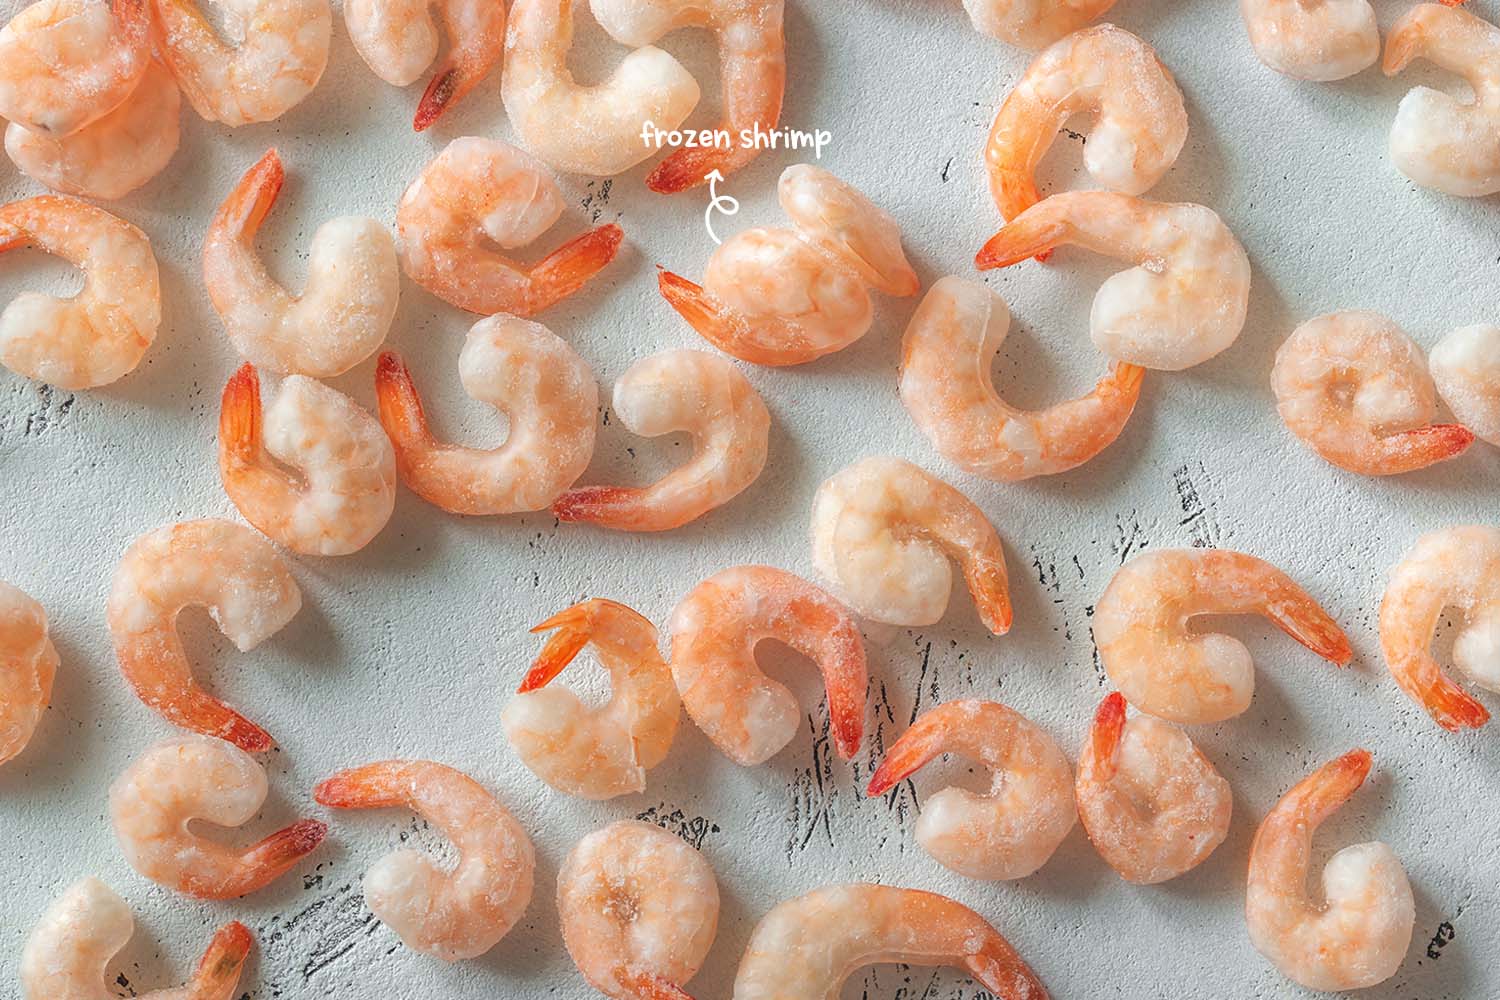 Because freezer burnt shrimp discolors, alters its texture, and loses some flavor over a while, you might think the flavor change is marginal if you were to taste it.